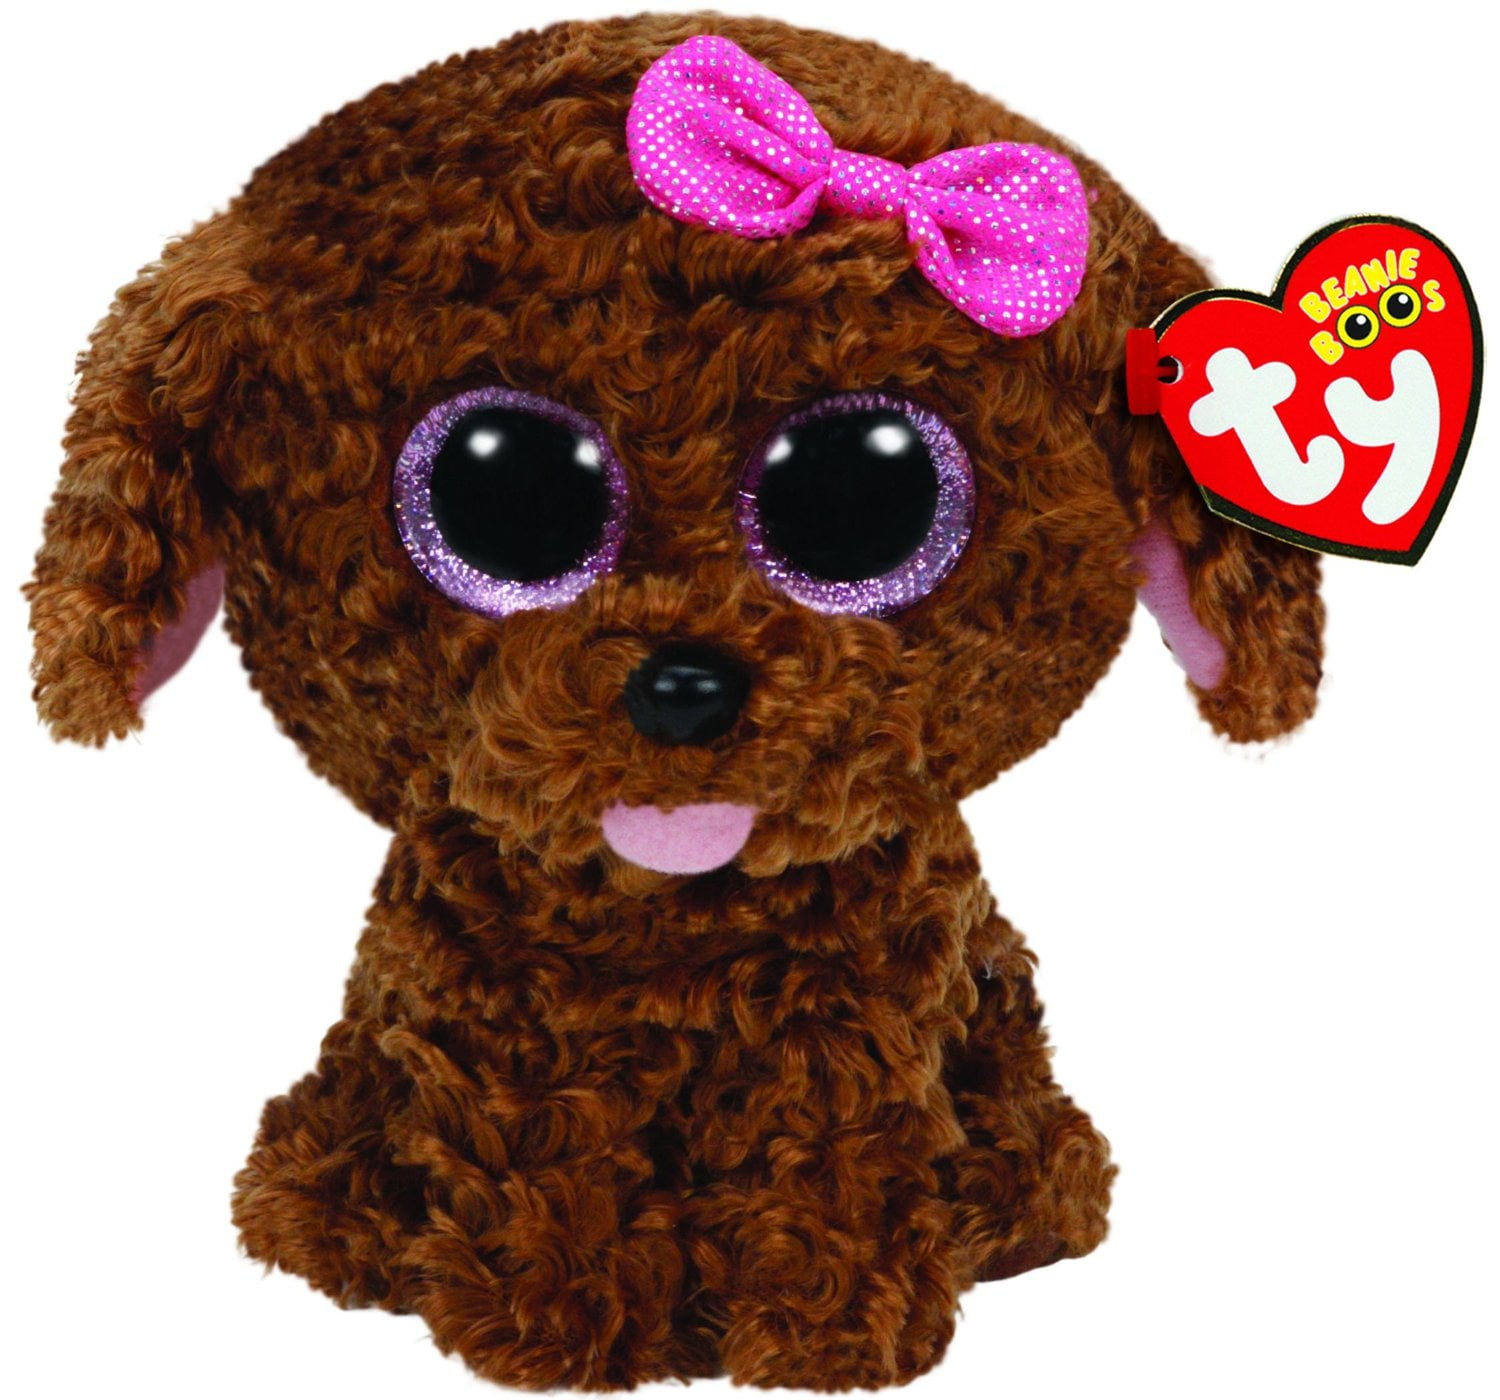 Ty Beanie Boo Boos 37175 Pippie The White Dog Regular 15cm for sale online 